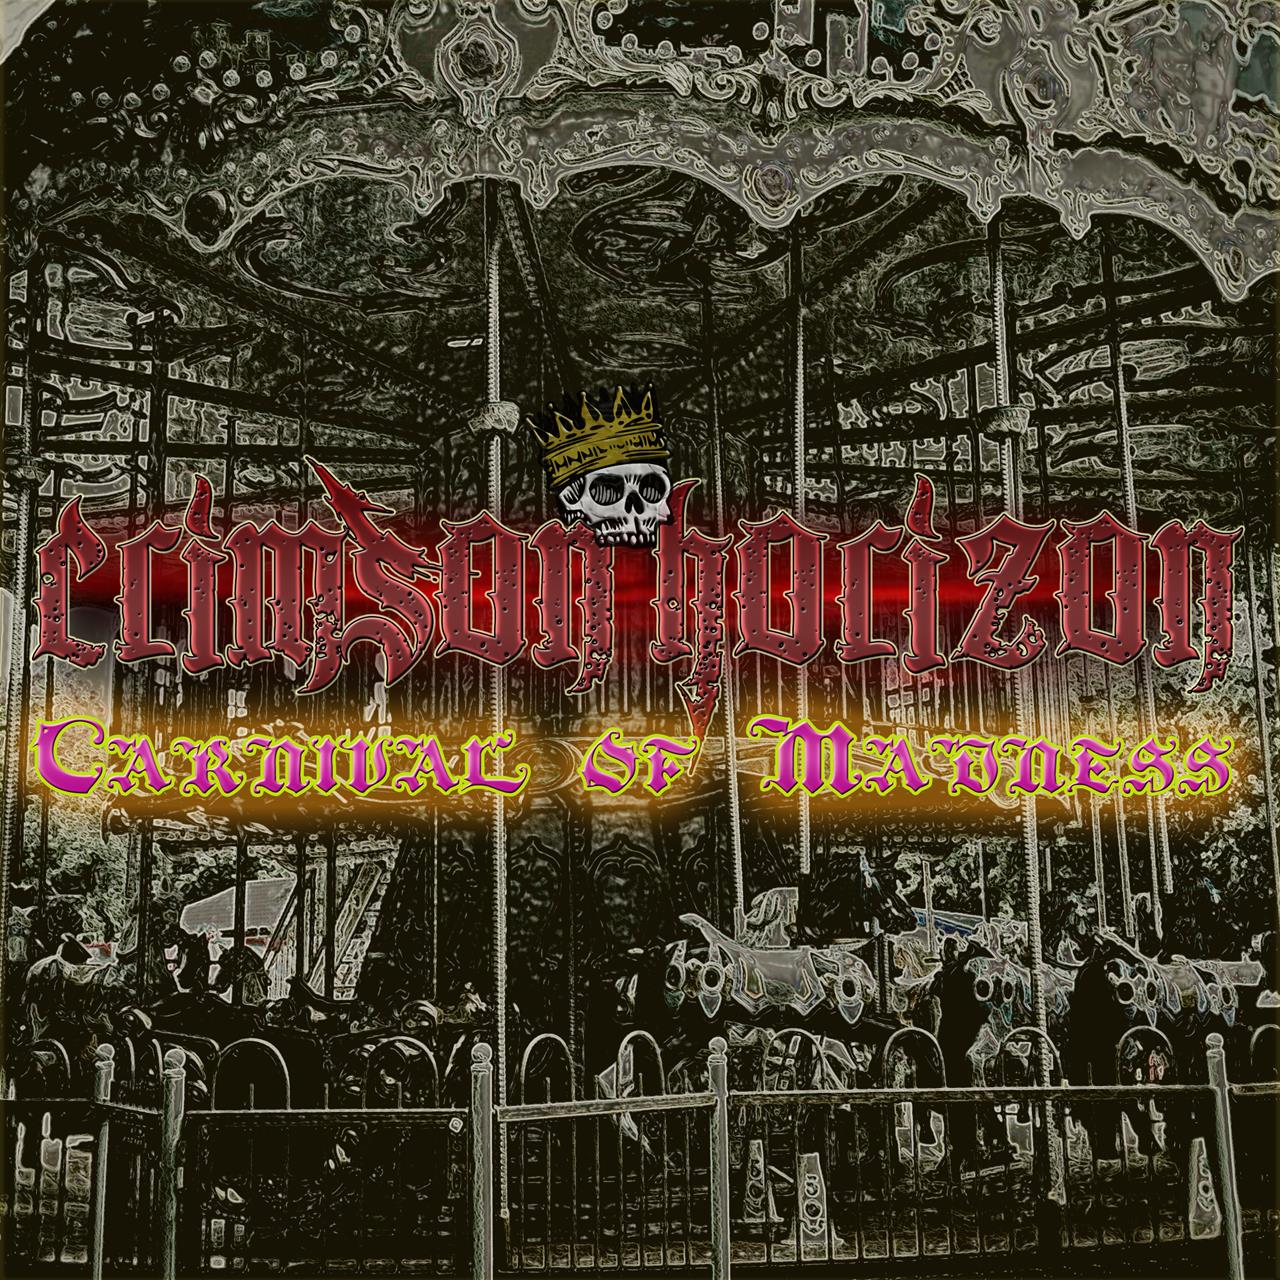 Carnival of Madness - cover art